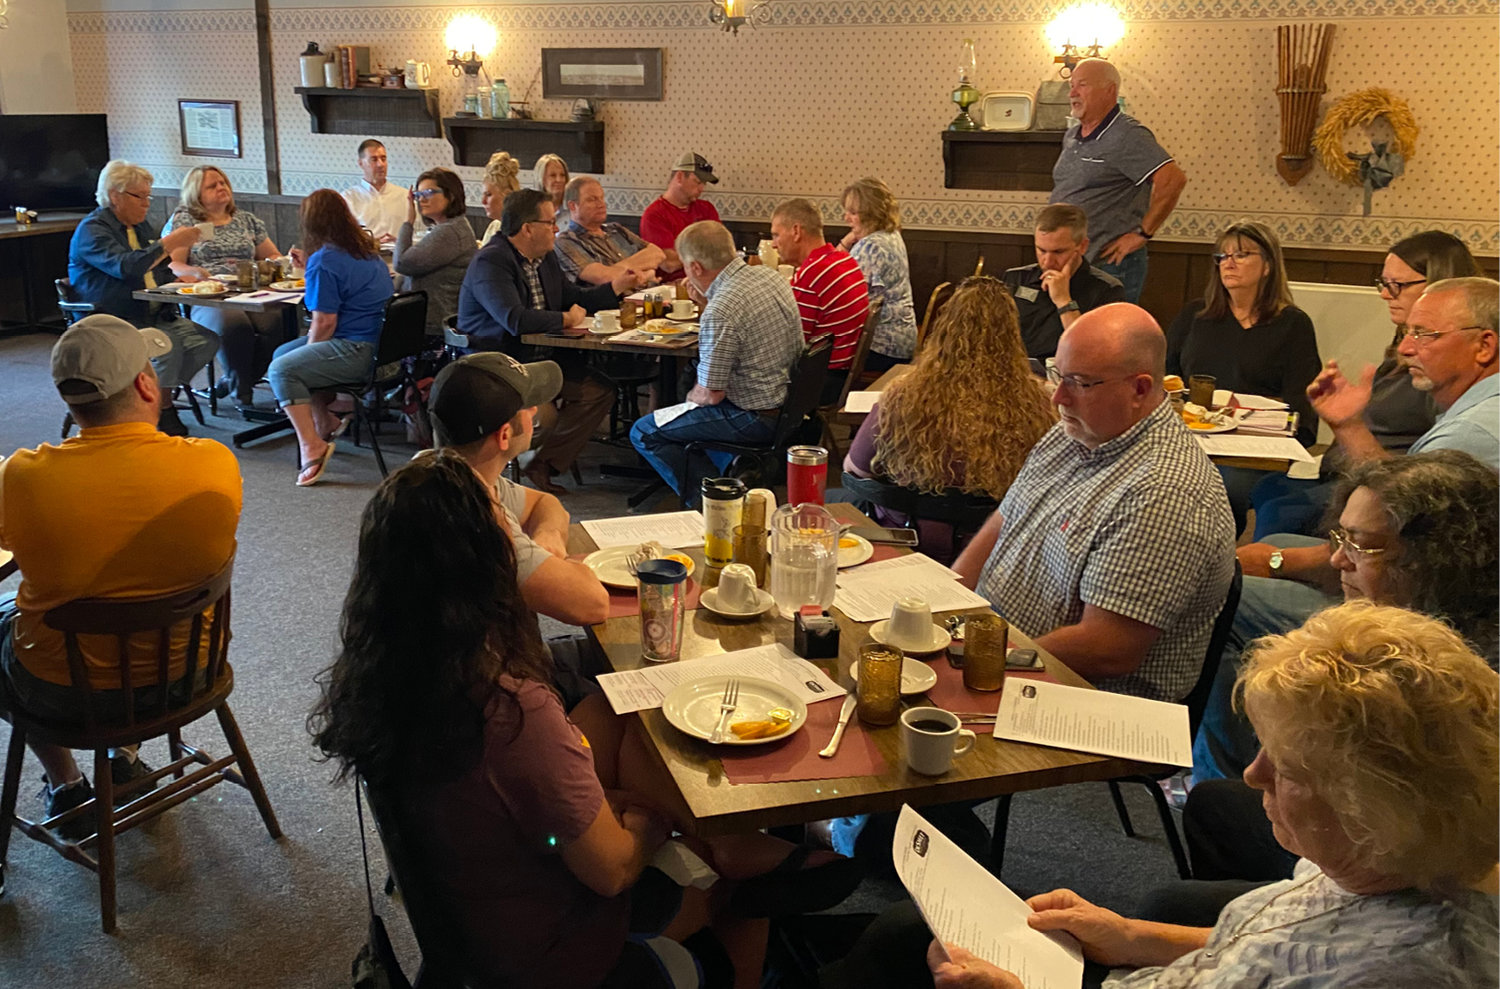 A crowd of over forty people gathered to hear what was going in and around the town of De Smet — many of whom gave updates about what was going on in their business or organization.